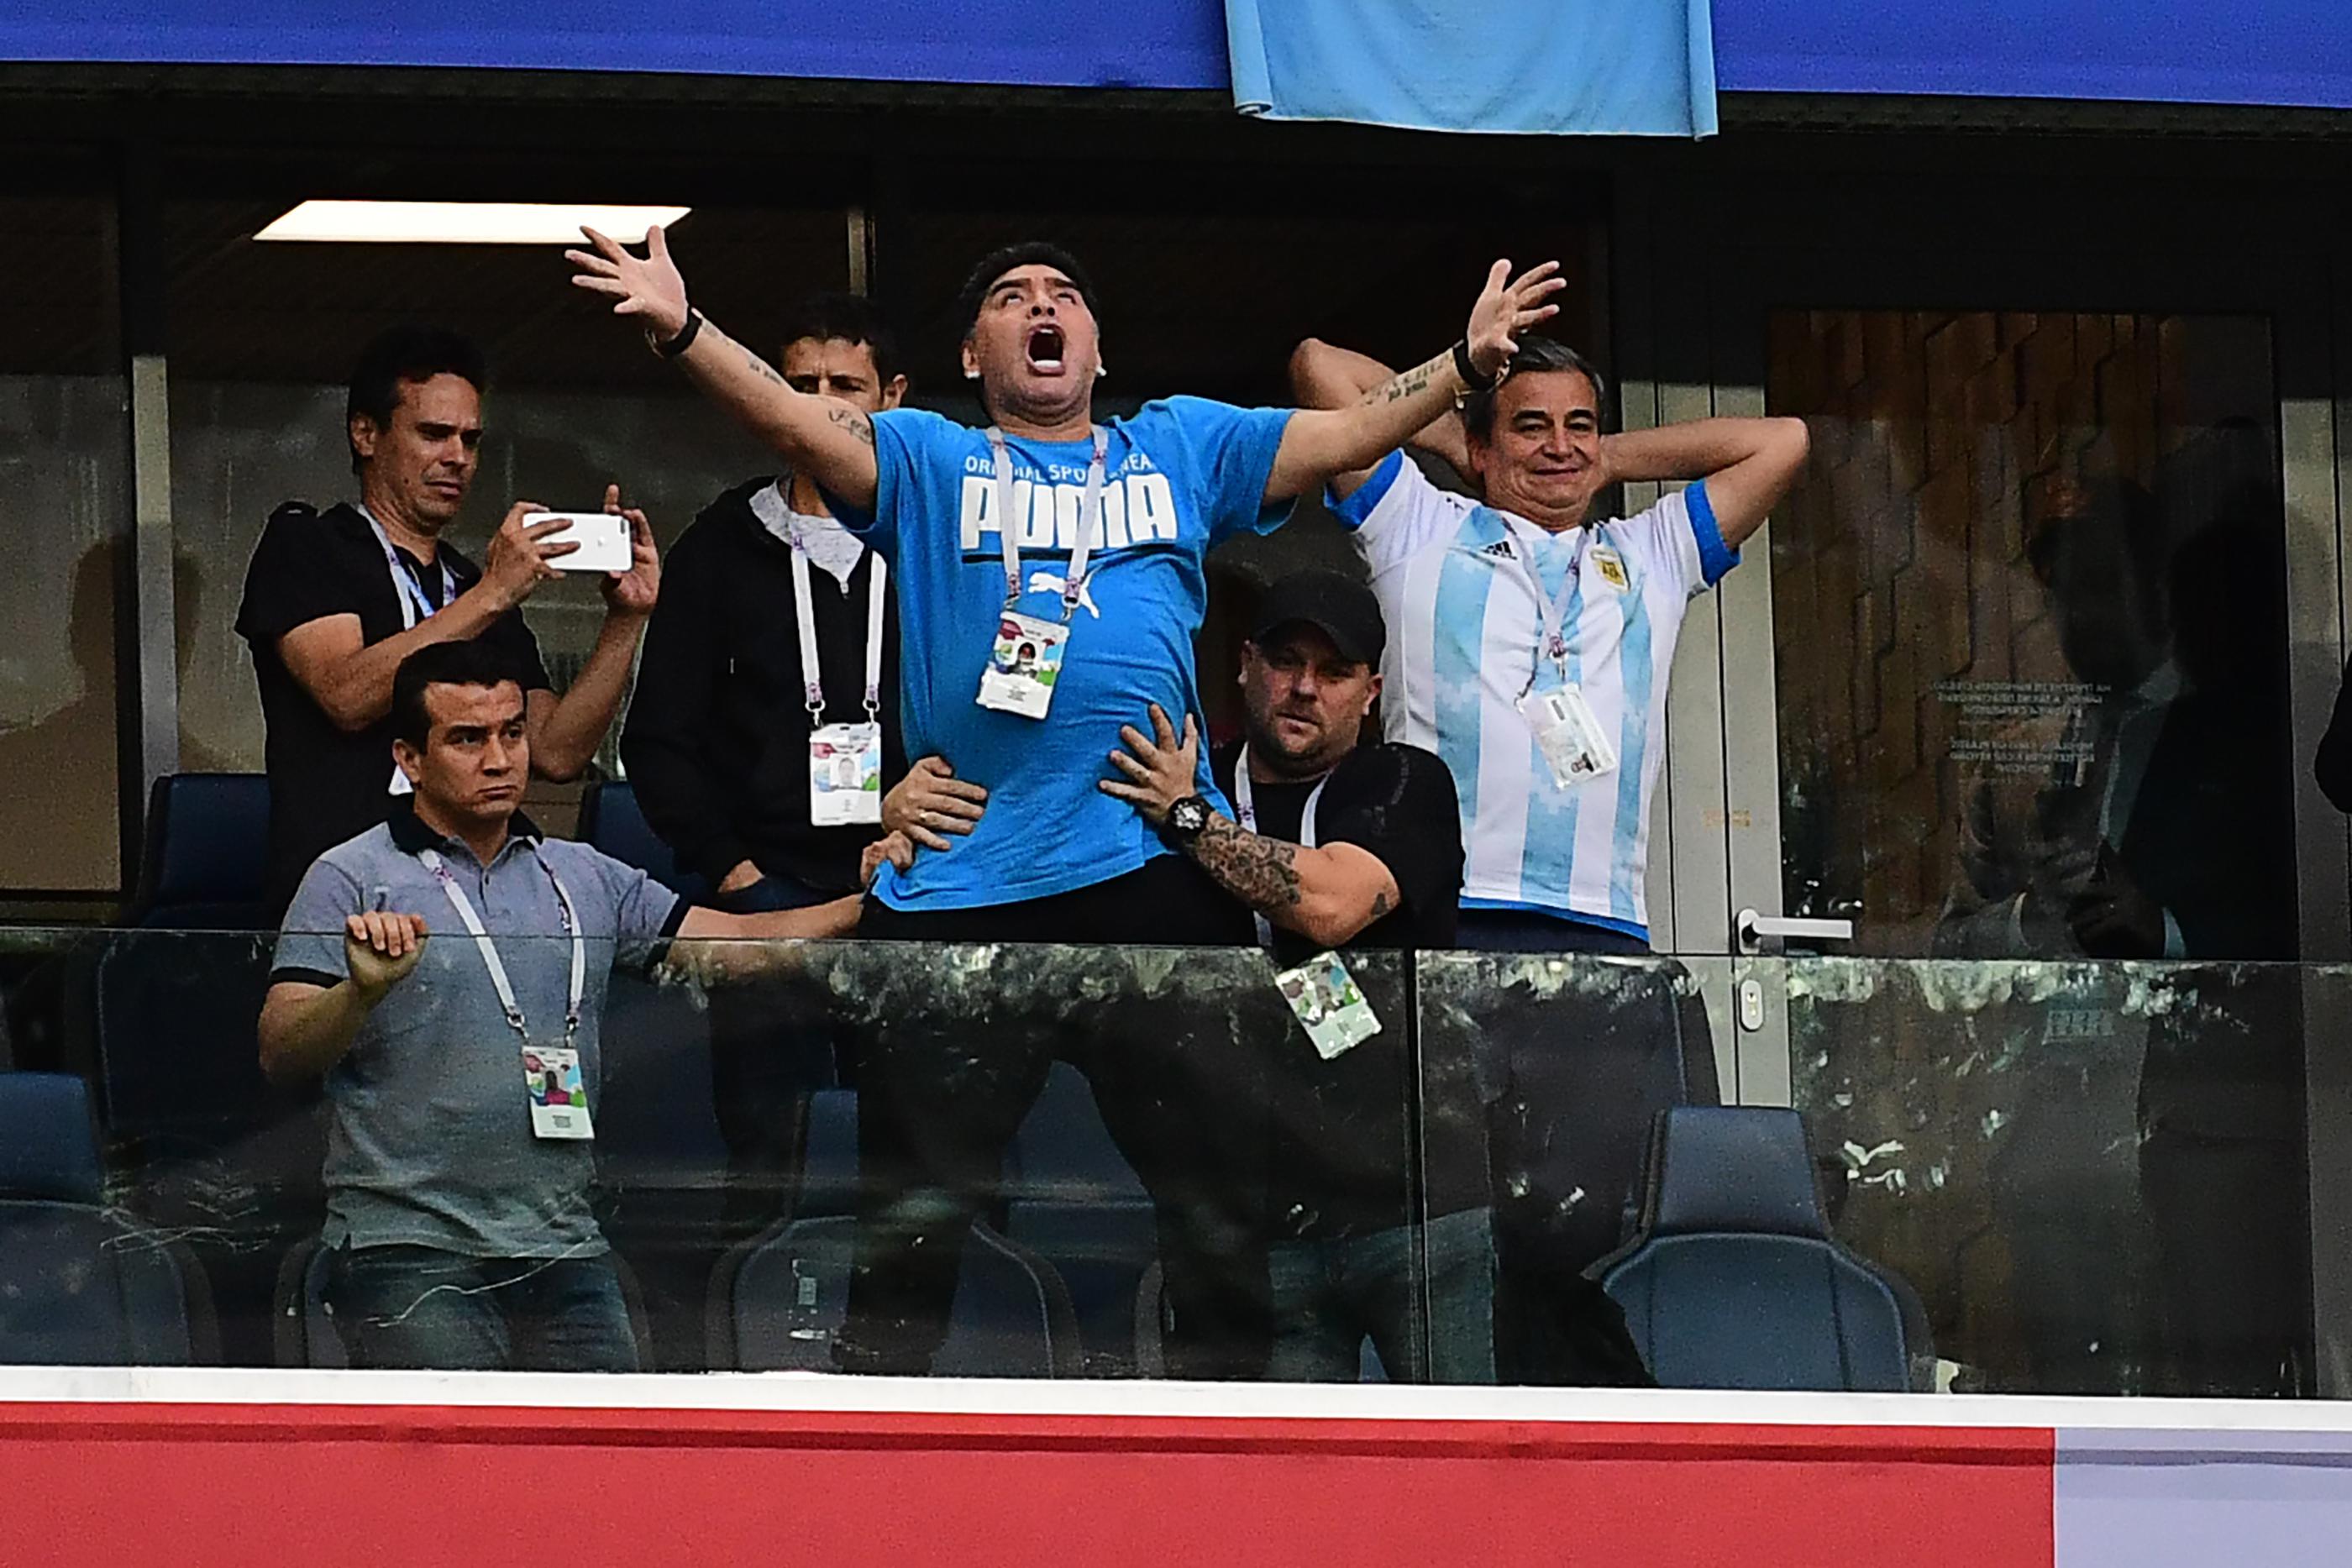 Former Argentina forward Diego Maradona (C) celebrates the opening goal during the Russia 2018 World Cup Group D football match between Nigeria and Argentina at the Saint Petersburg Stadium in Saint Petersburg on June 26, 2018. (Photo by Giuseppe CACACE / AFP) / RESTRICTED TO EDITORIAL USE - NO MOBILE PUSH ALERTS/DOWNLOADS        (Photo credit should read GIUSEPPE CACACE/AFP/Getty Images)